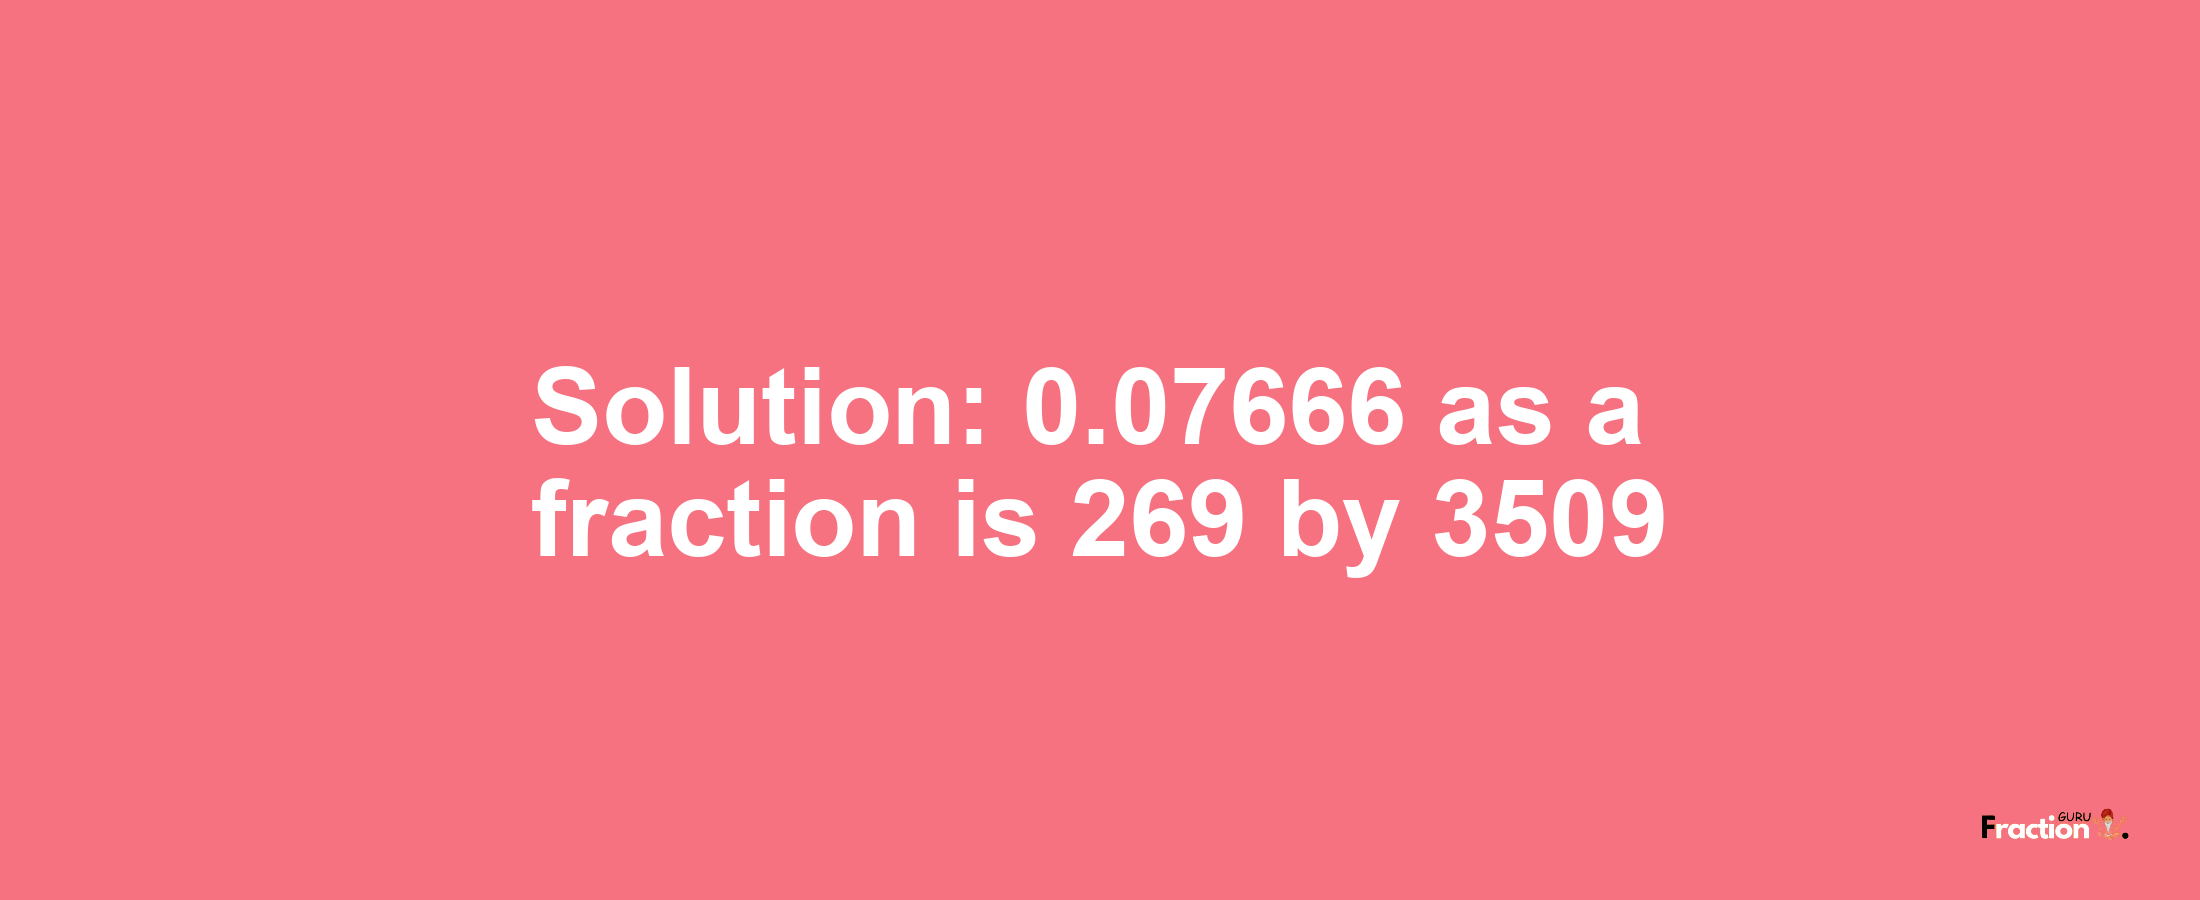 Solution:0.07666 as a fraction is 269/3509